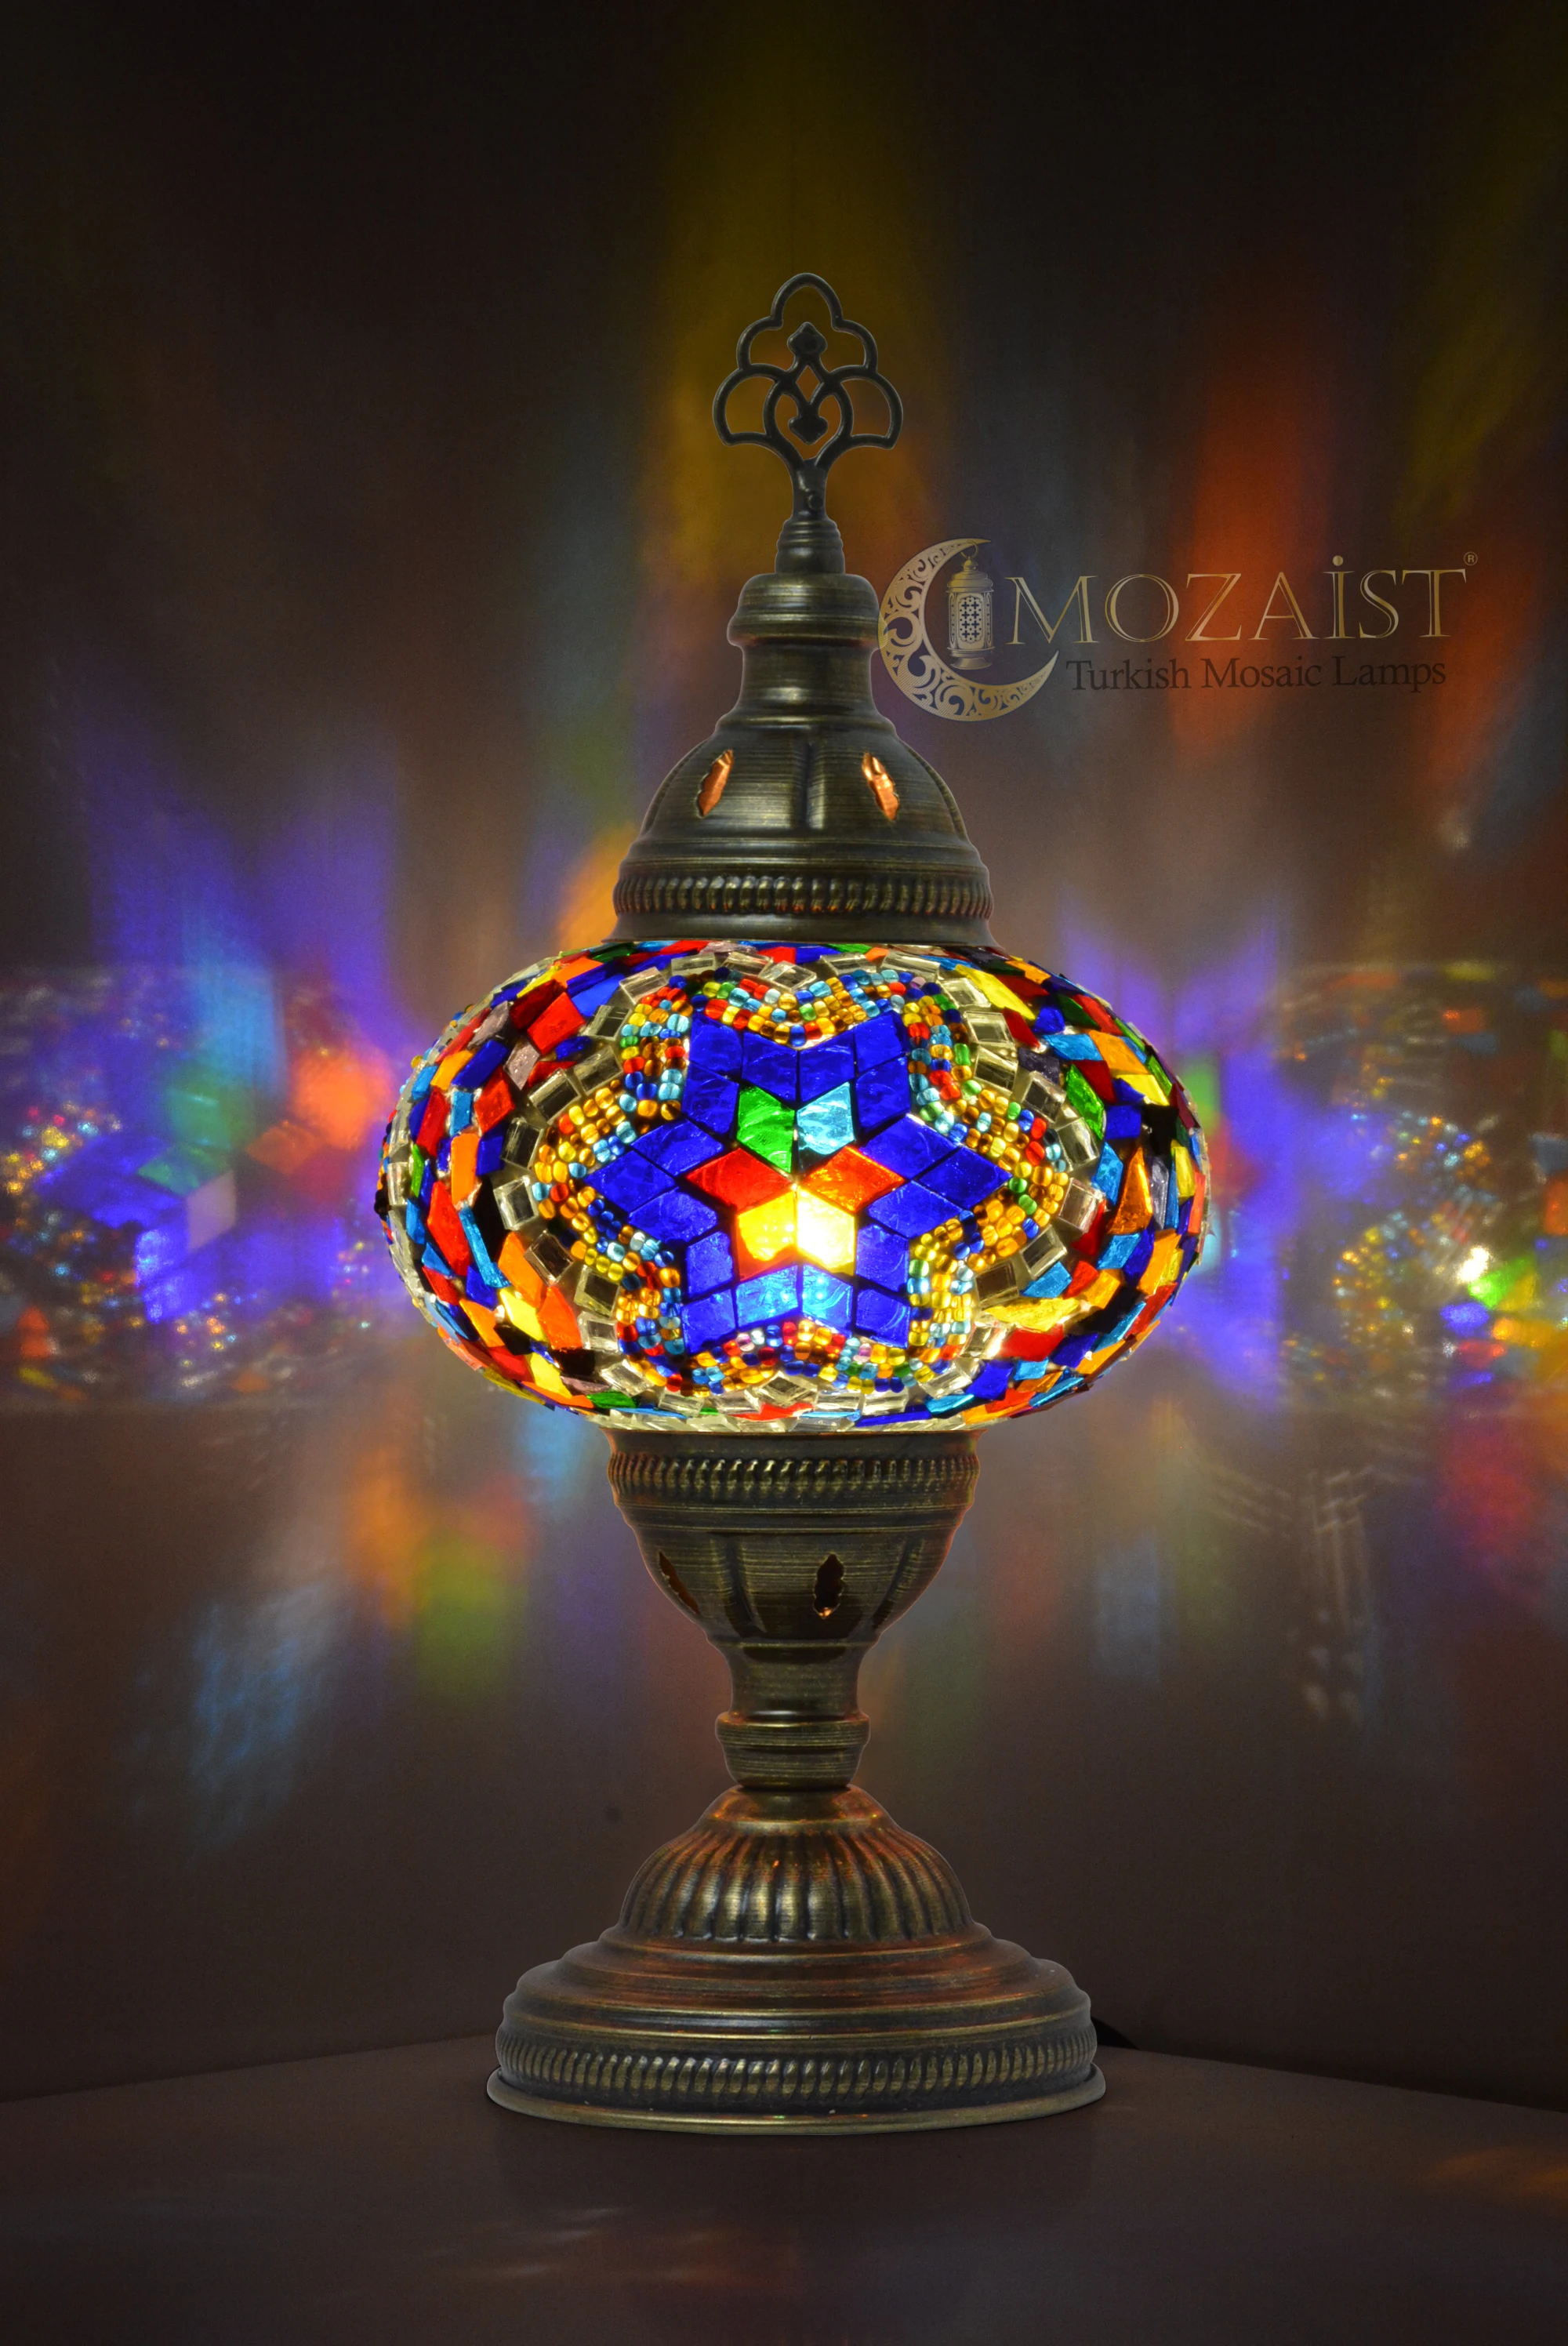 MOZAIST Turkish Lamp 8 COLOR Mosaic Table Lamp Antique Moroccan Decorative Glass Bohemian Vintage Light Shade, Tiffany Bedside